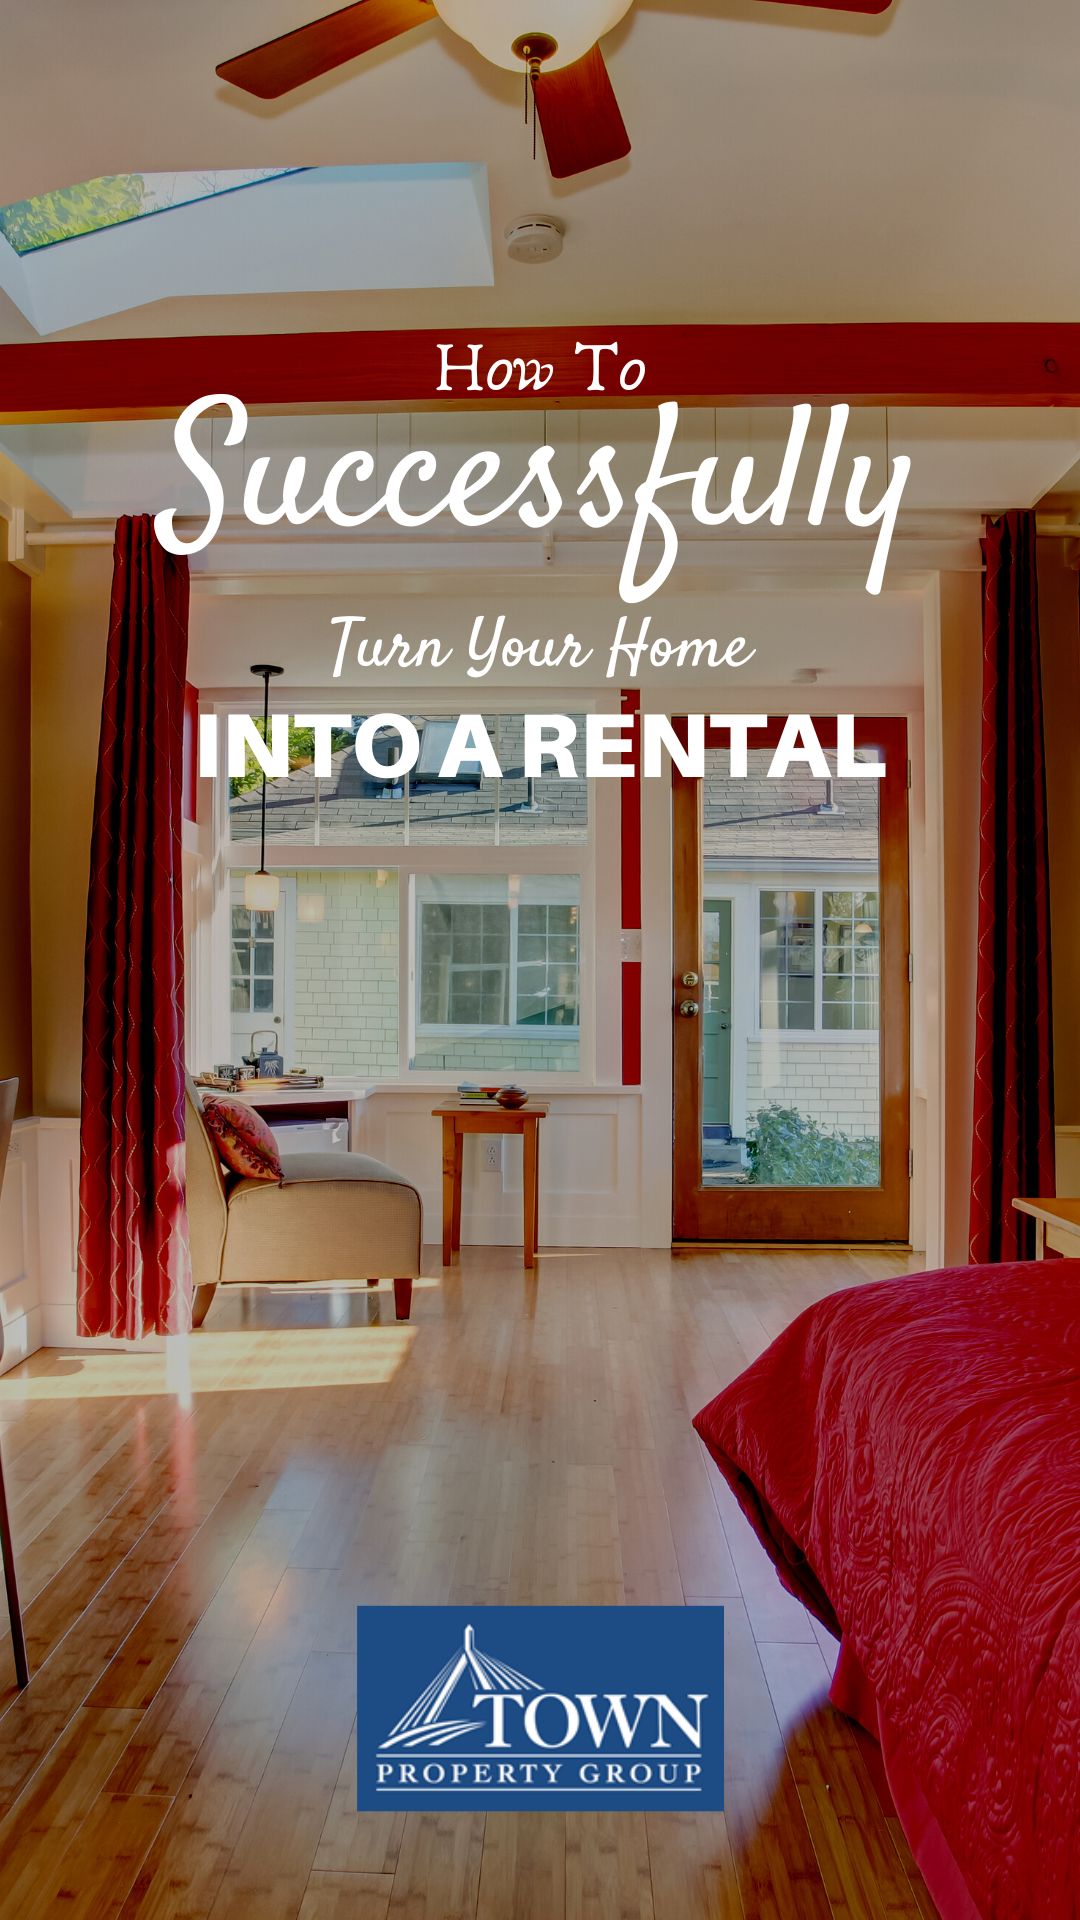 How to Successfully Turn Your Home into a Rental